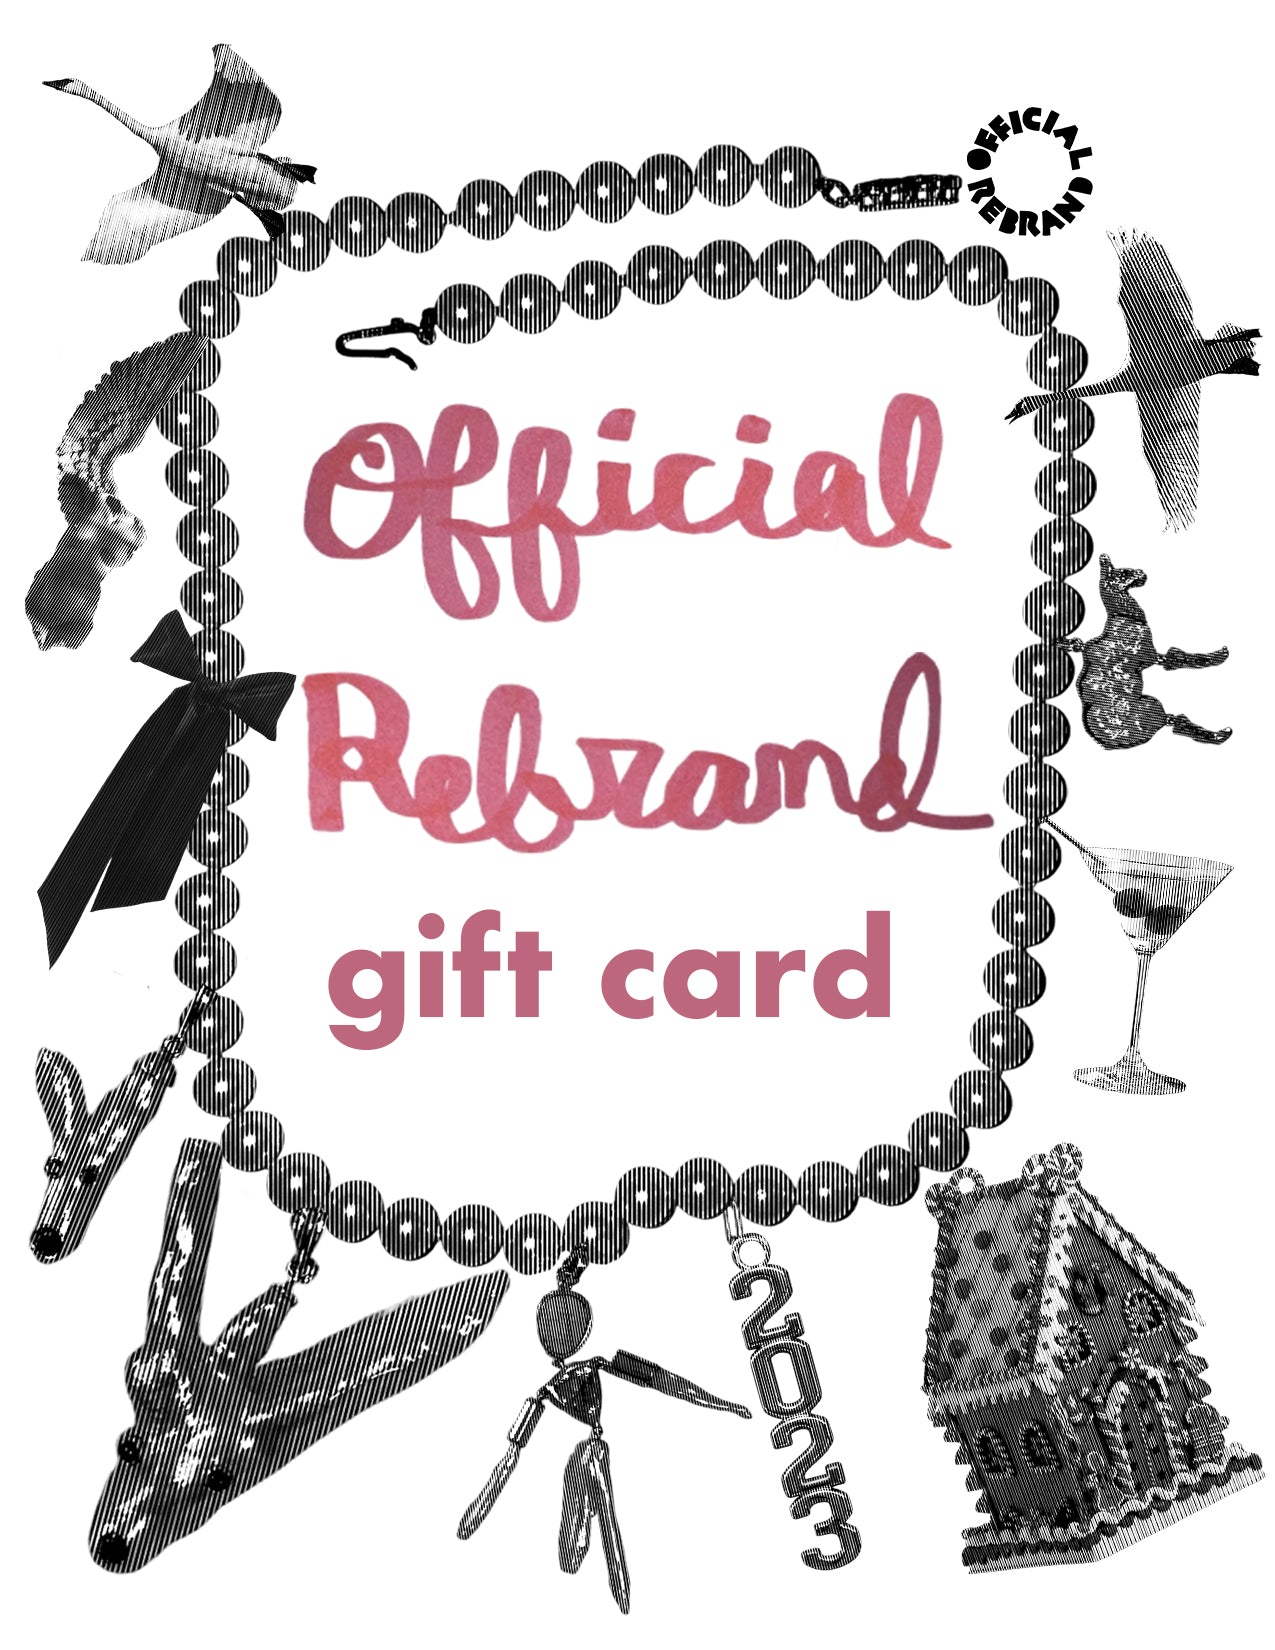 OFFICIAL REBRAND Gift Card